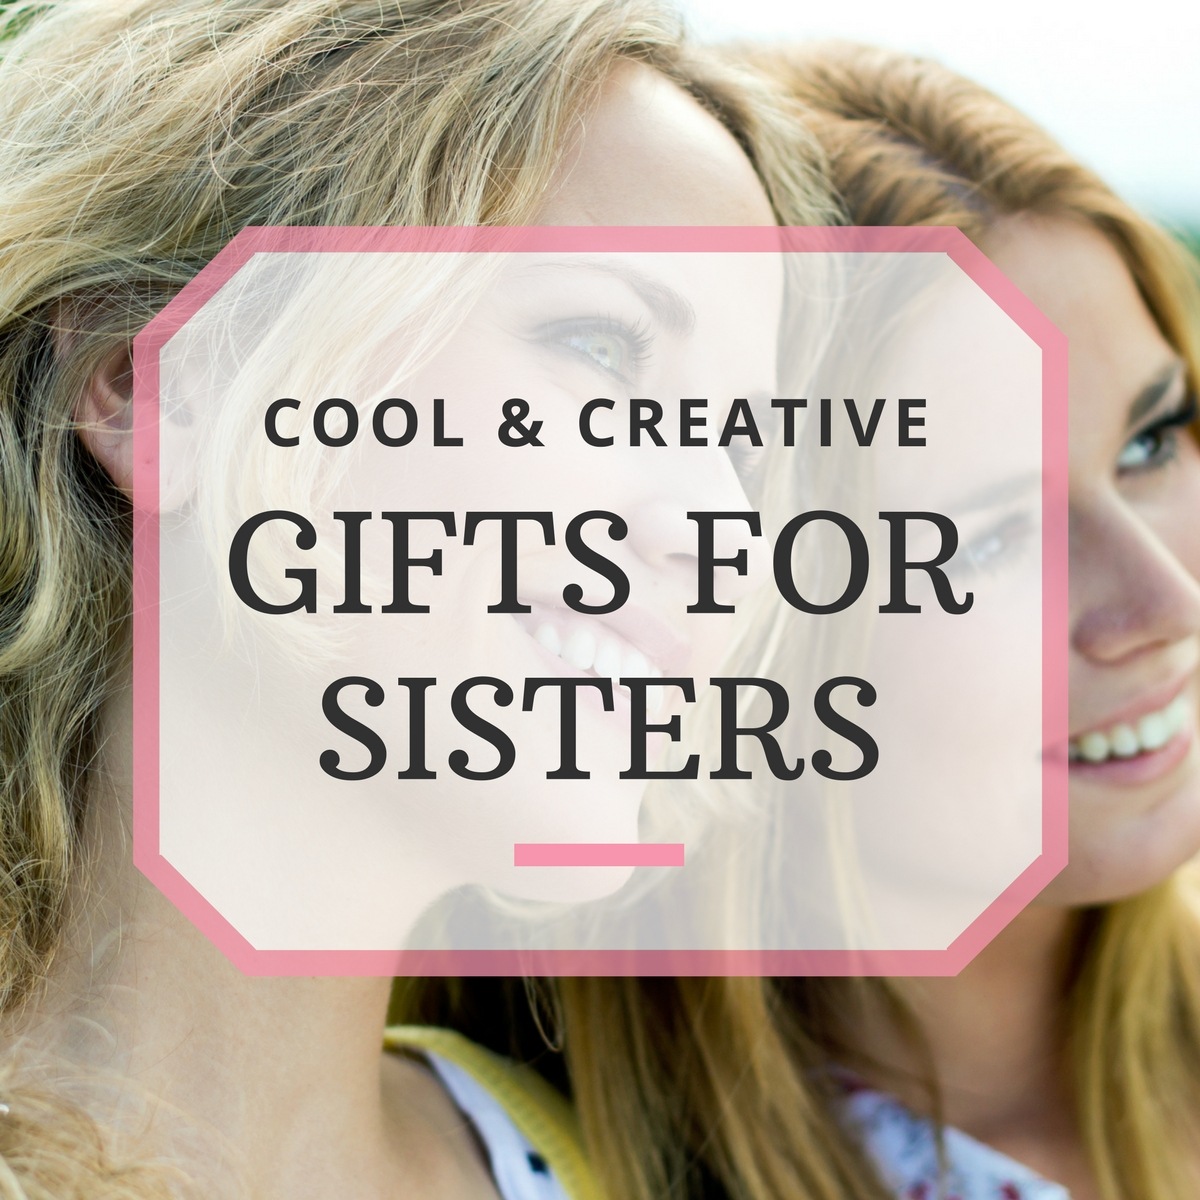 10 Great Gift Ideas for Sisters: Sentimental, Practical ...